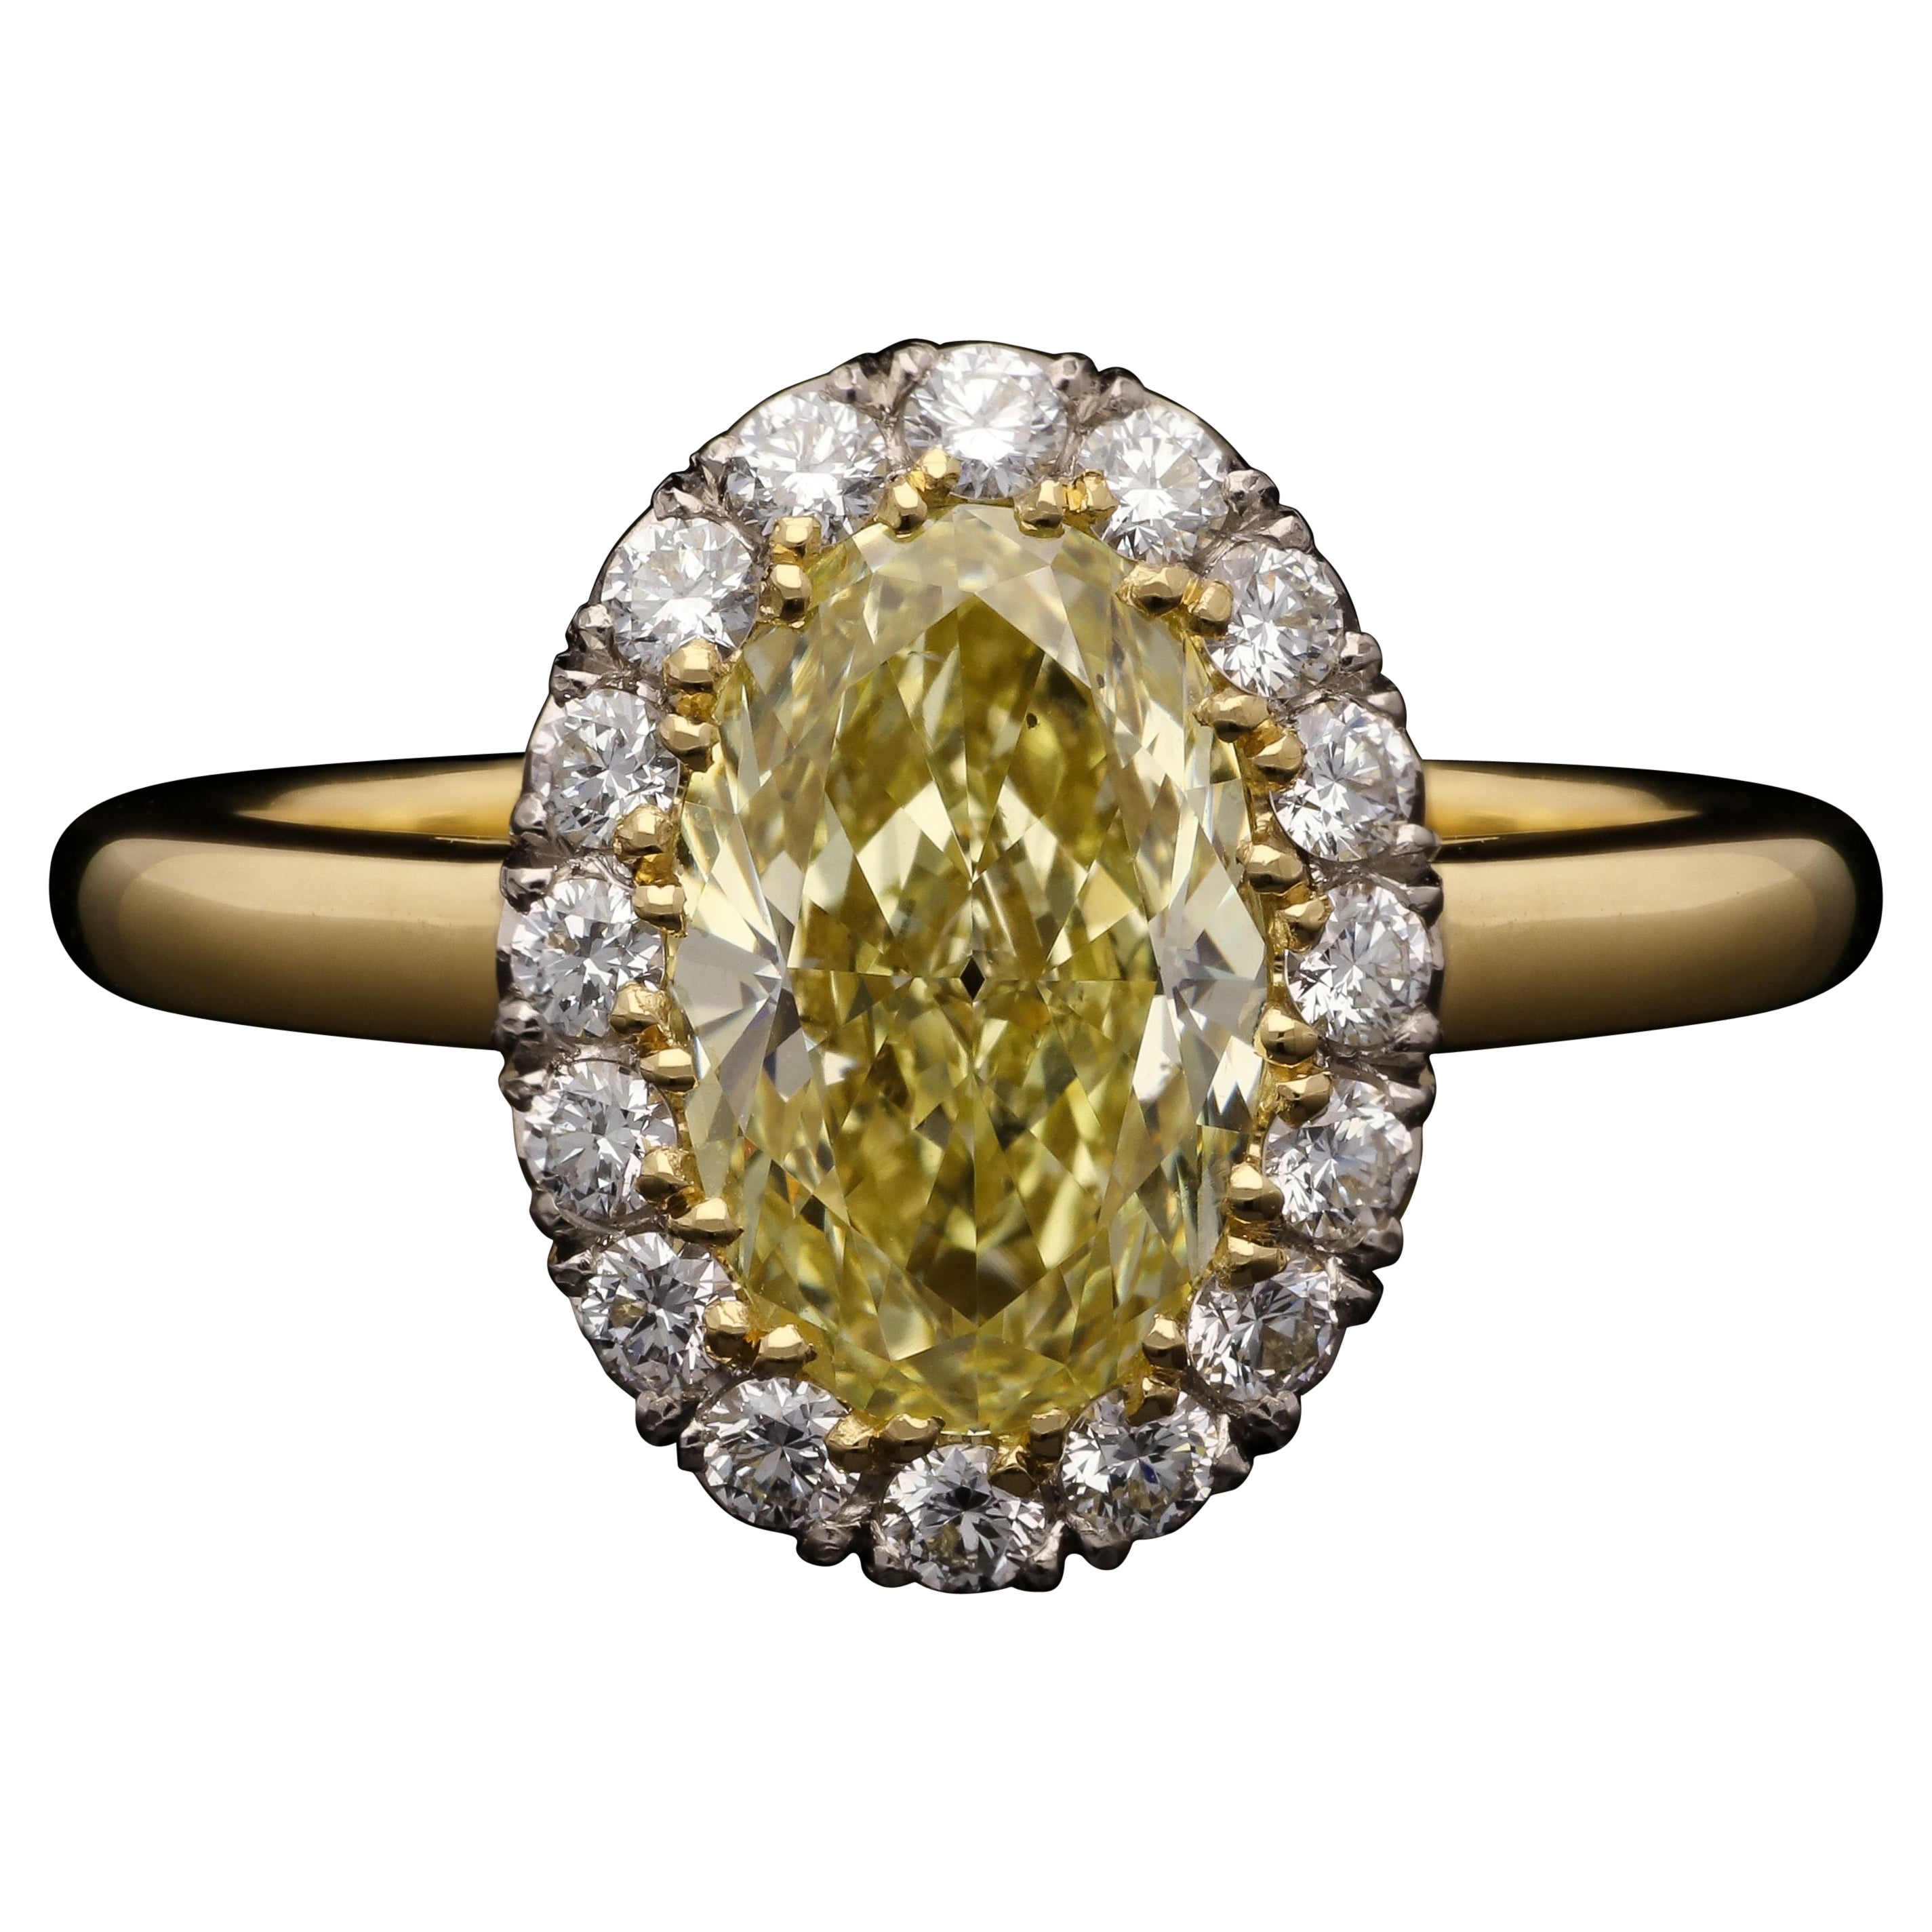 Hancocks 1.54ct Fancy Yellow Oval Diamond Cluster Ring with Diamond Surround For Sale